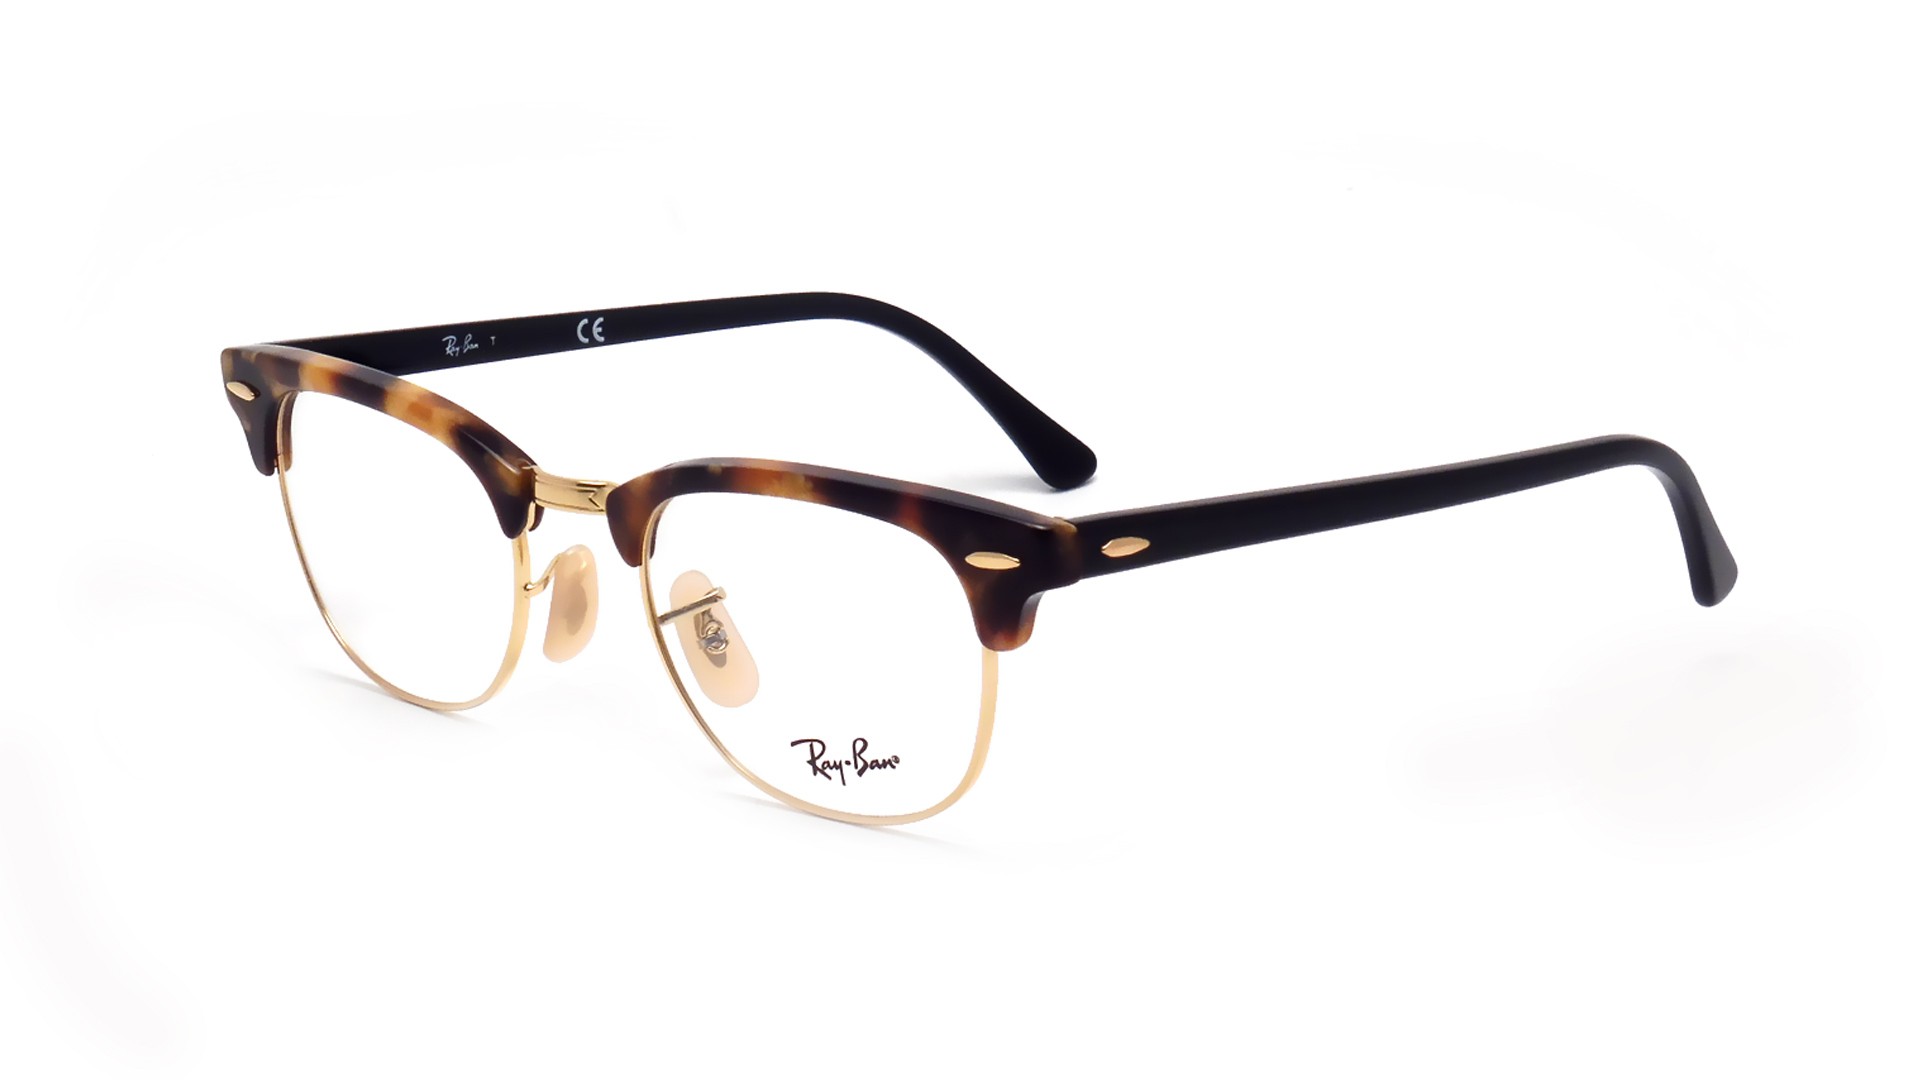 Lunettes De Vue Ray Ban Clubmaster Tortoise Rx5154 Rb5154 5494 49 21 Visiofactory